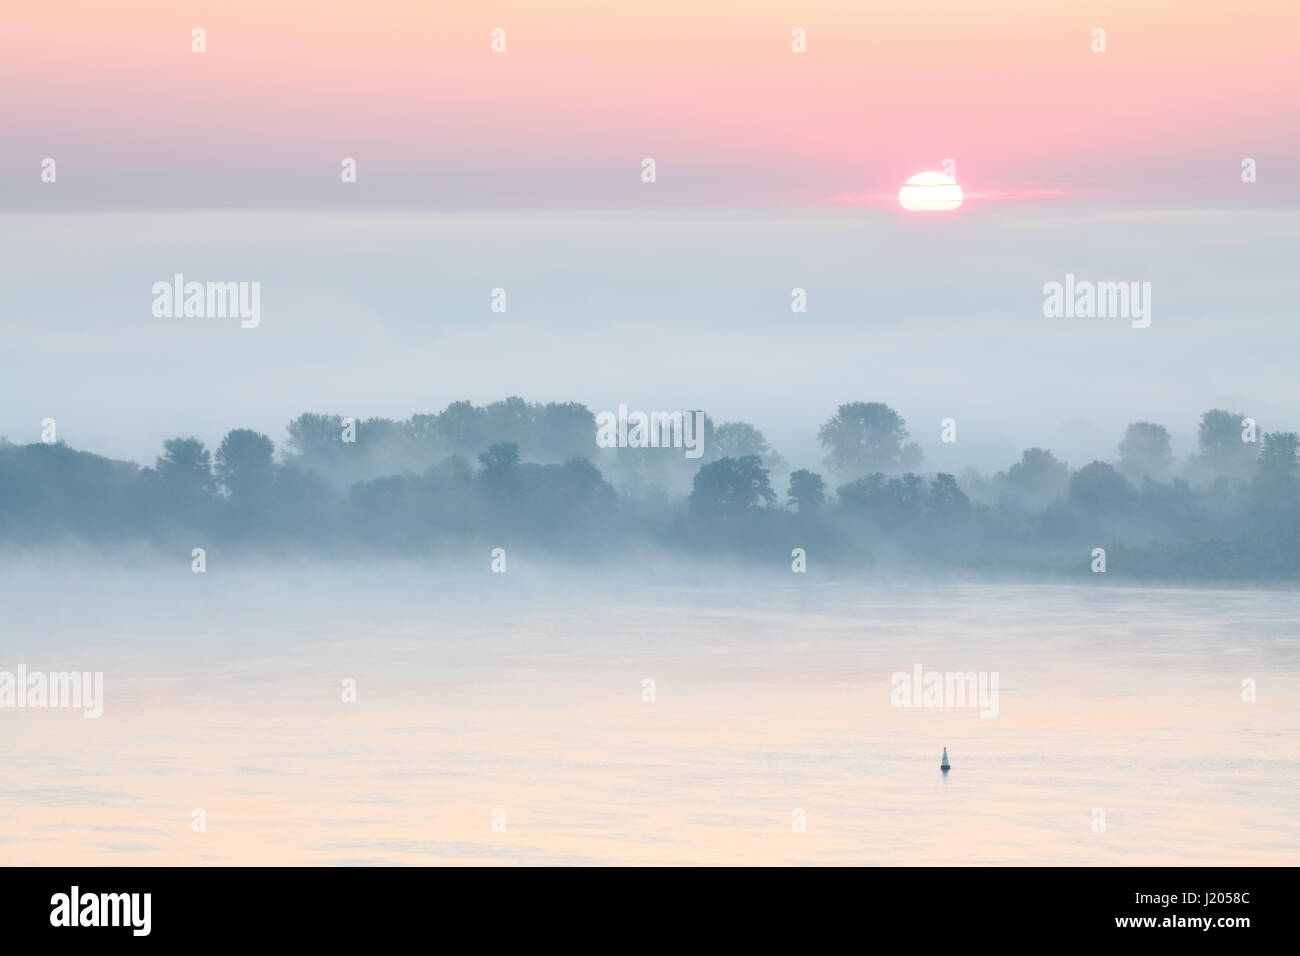 Extraordinary scenery of the river Volga covered with dense mist at sunrise Stock Photo